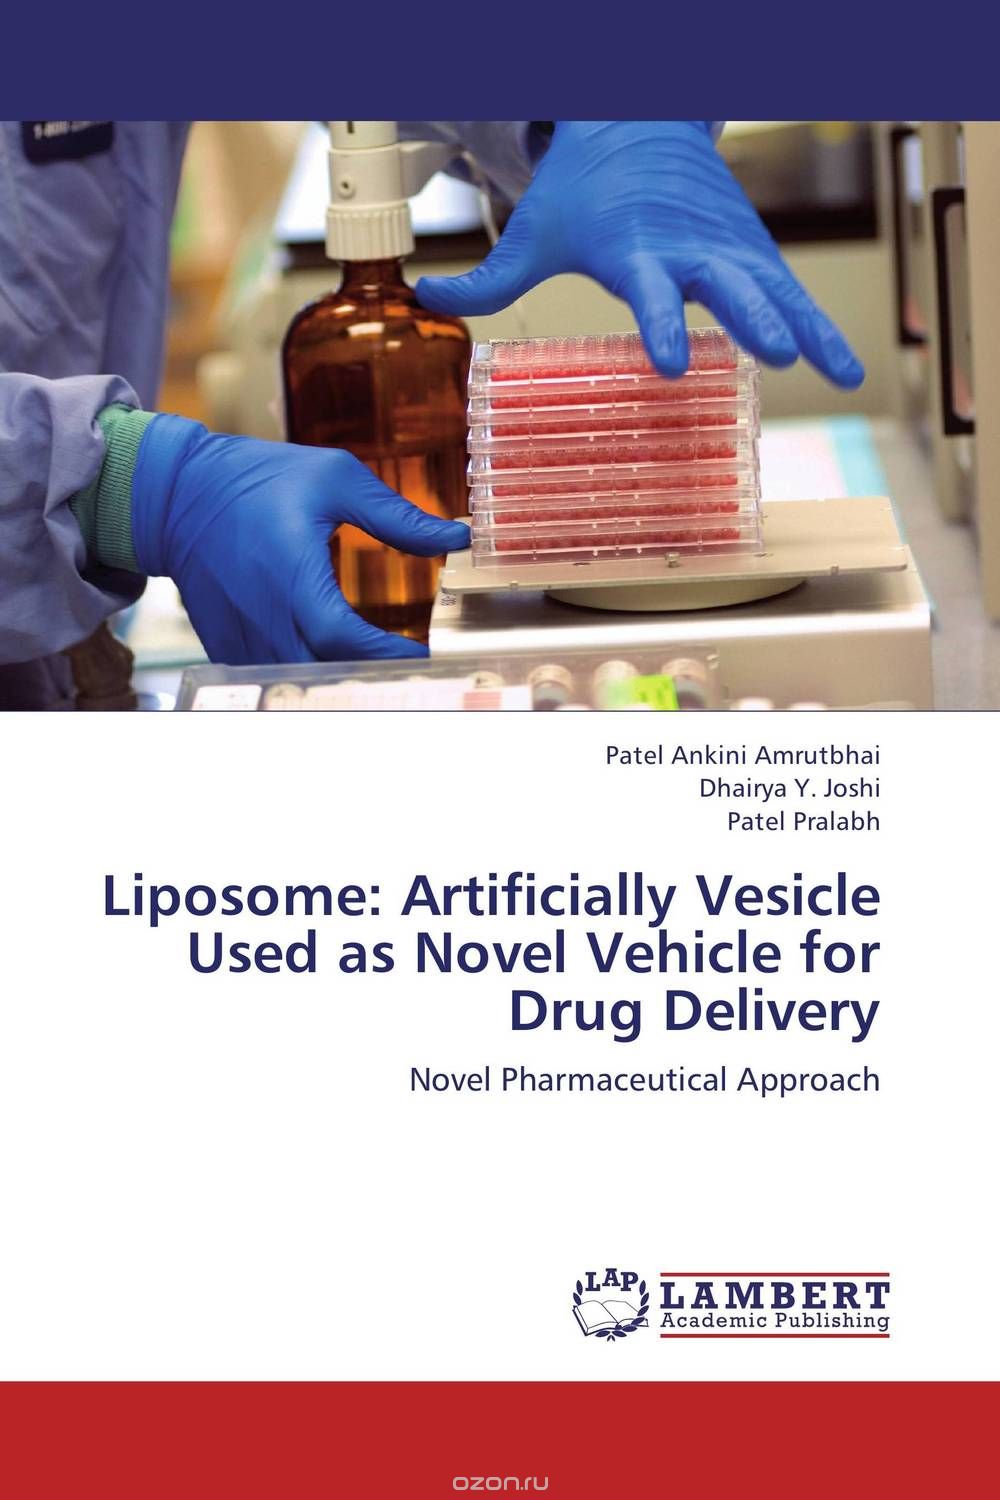 Скачать книгу "Liposome: Artificially Vesicle Used as Novel Vehicle for Drug Delivery"